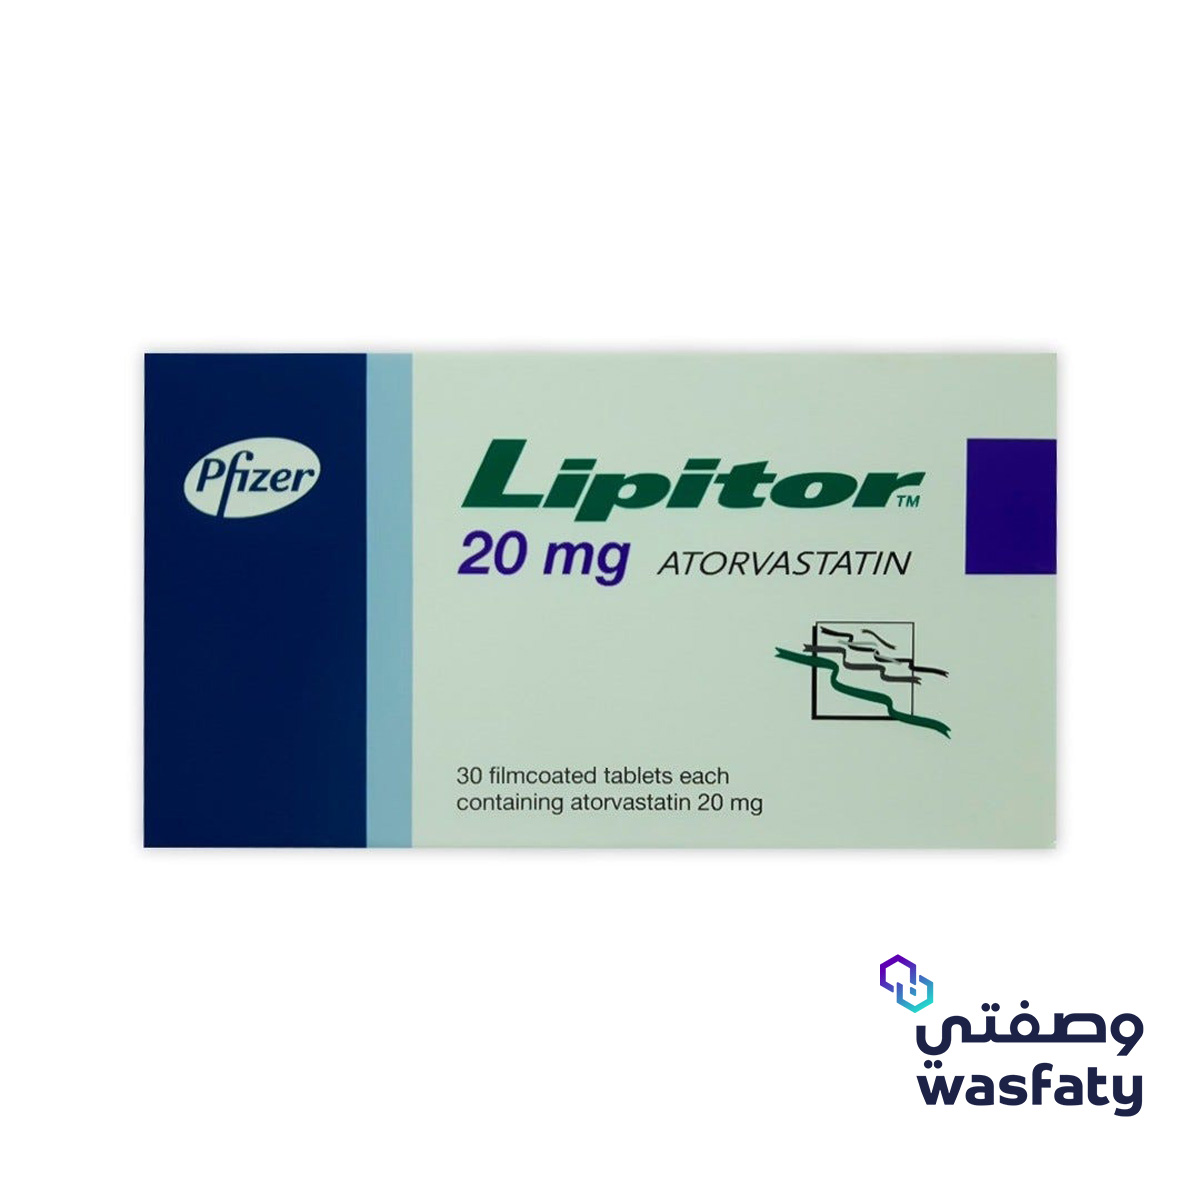 lipitor dosage forms and strengths